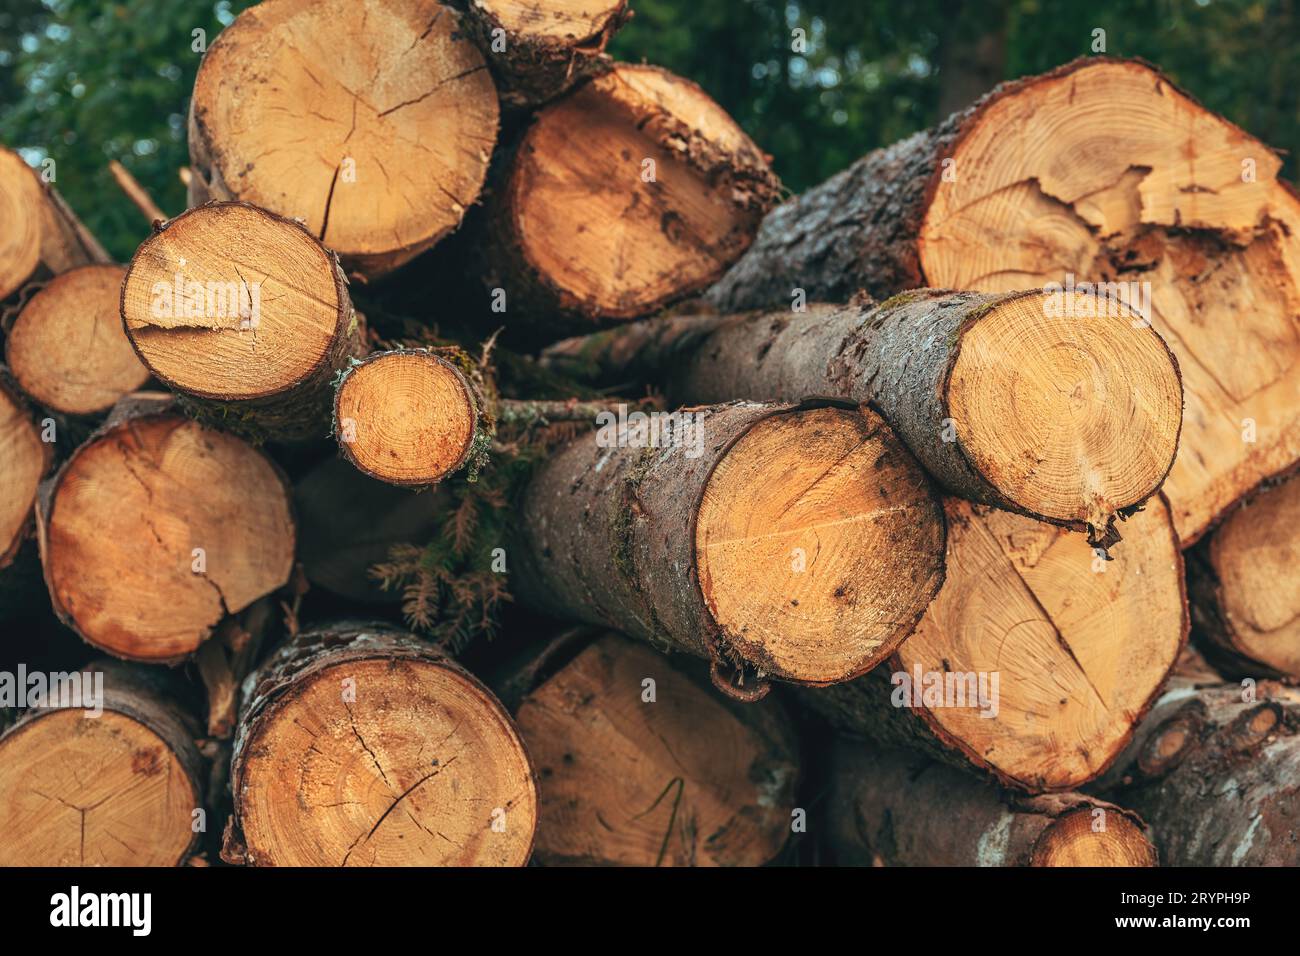 Lumber industry, cut down tree trunks stacked for transport Stock Photo